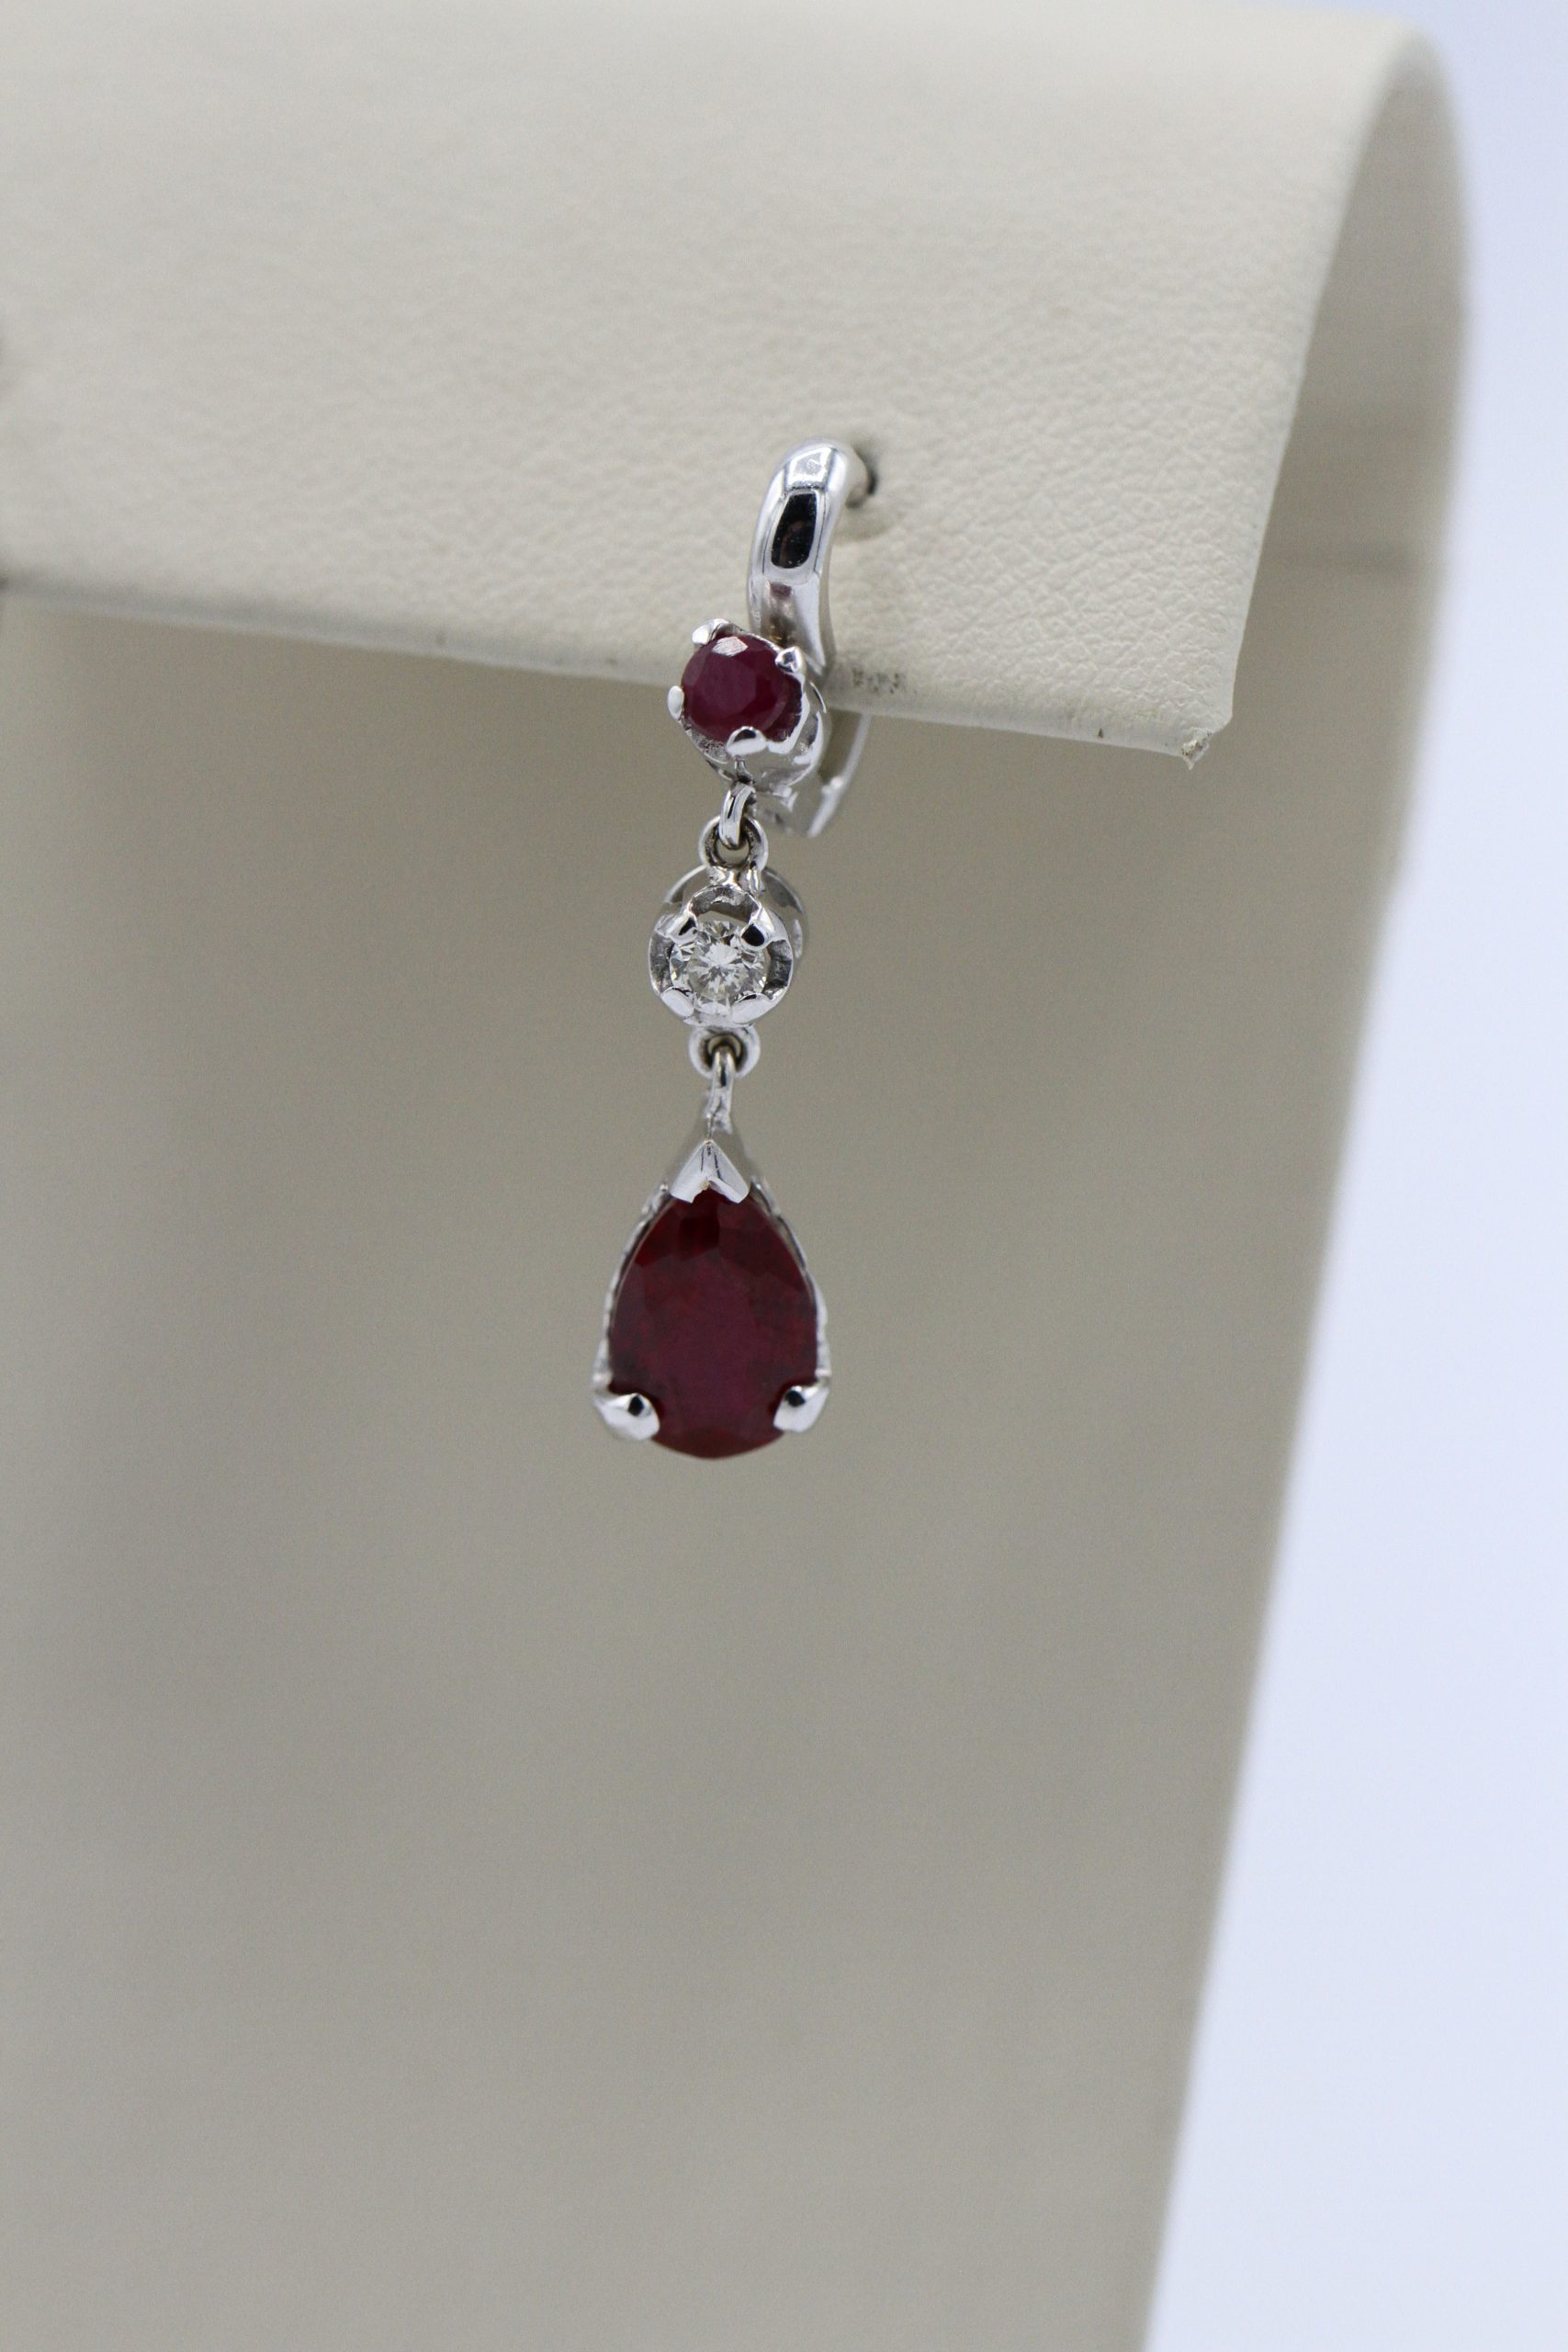 Earrings with a red stone